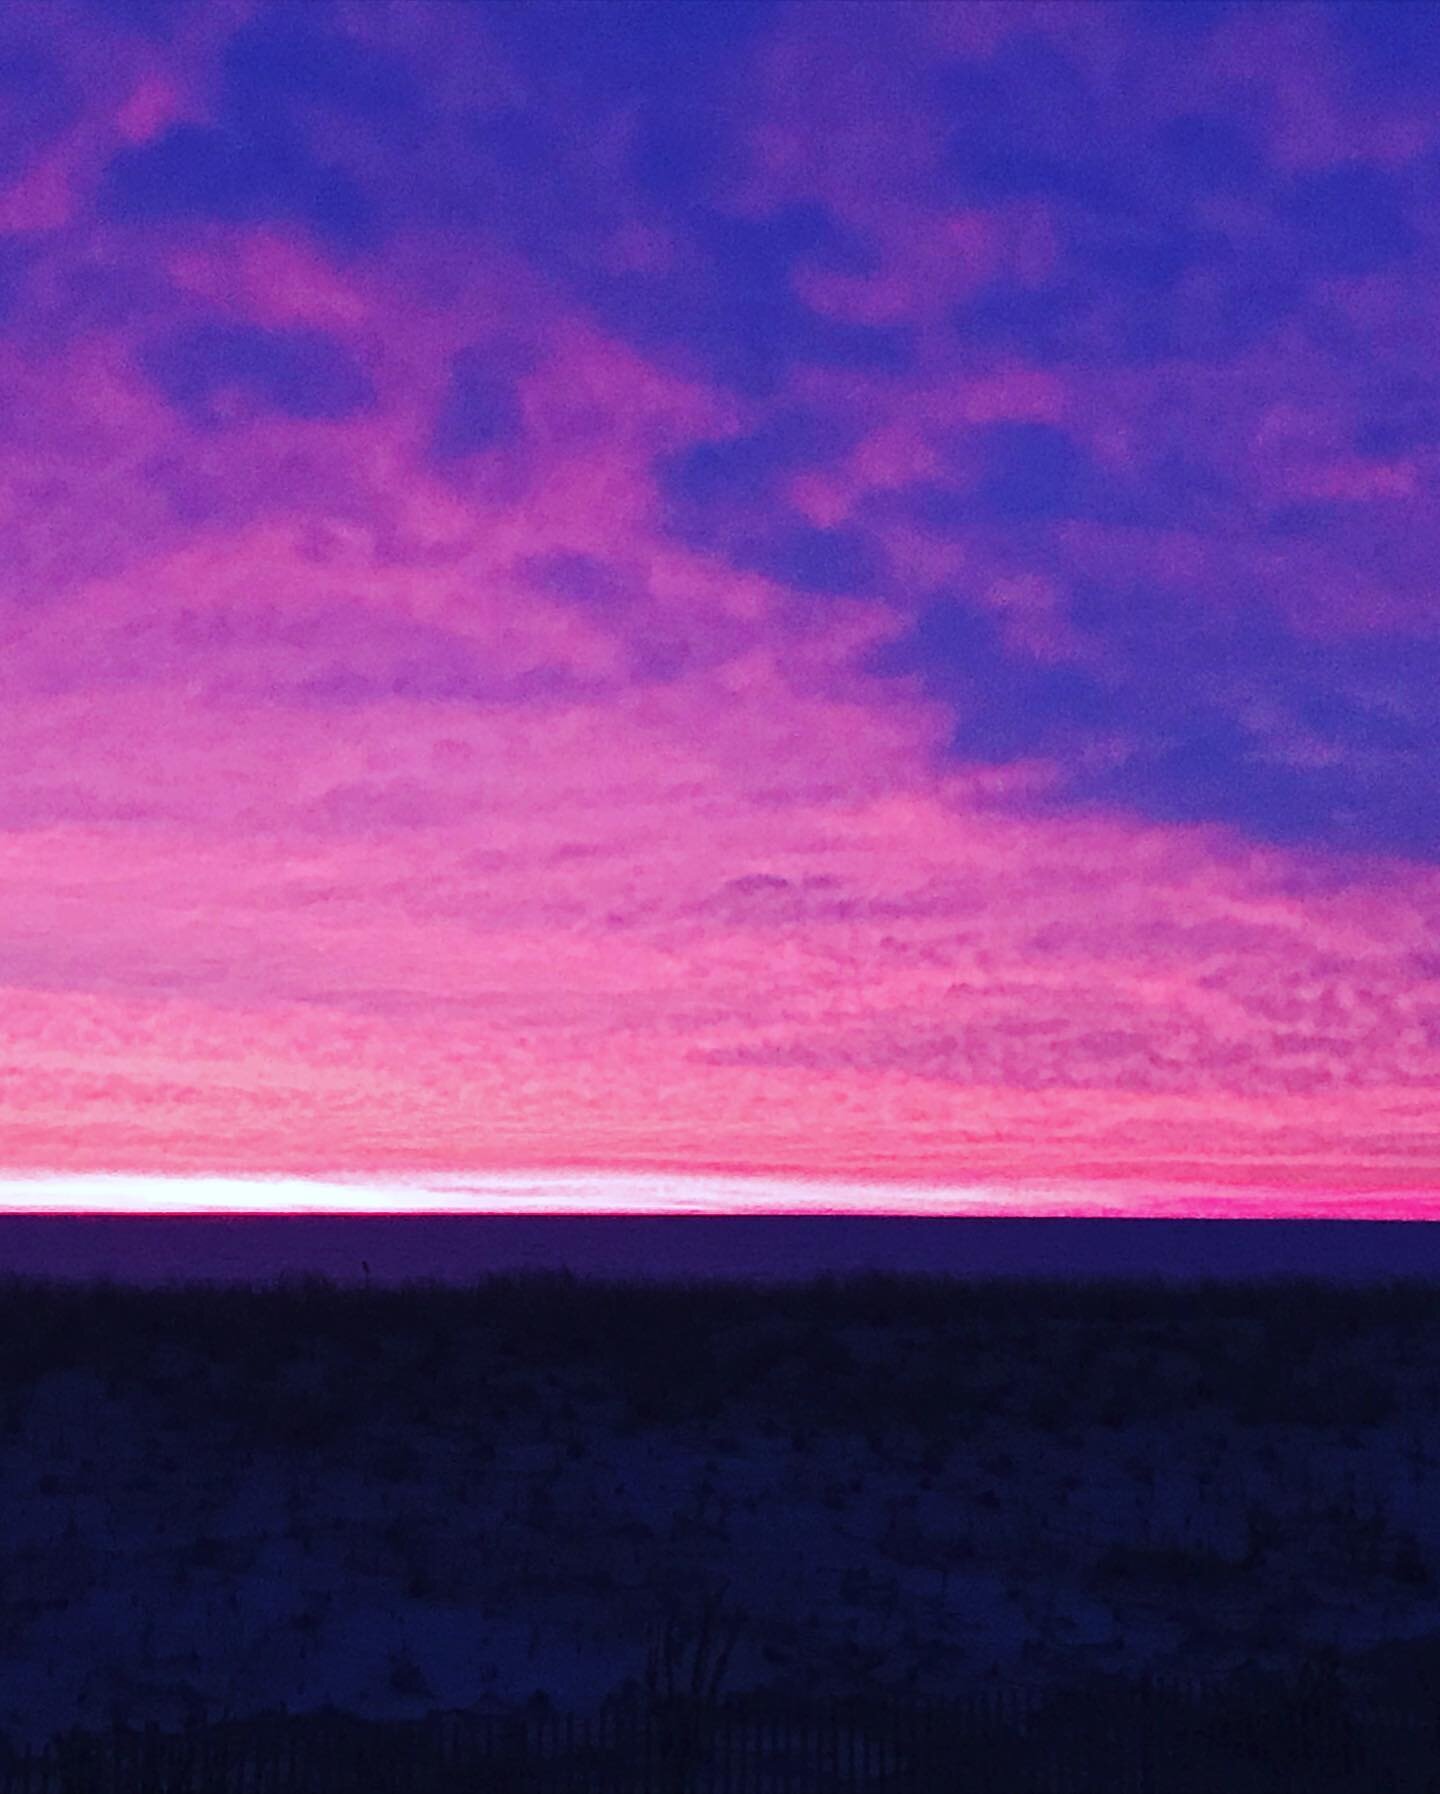 Red sky in the morning sailors take warning - red sky at night sailors delight- the rains coming!  Stop in for some rainy day goodies!  New #vegan#glutenfree#peppermint#marshmallowtreats are really good!  But I think it&rsquo;s a day for a hot chocol